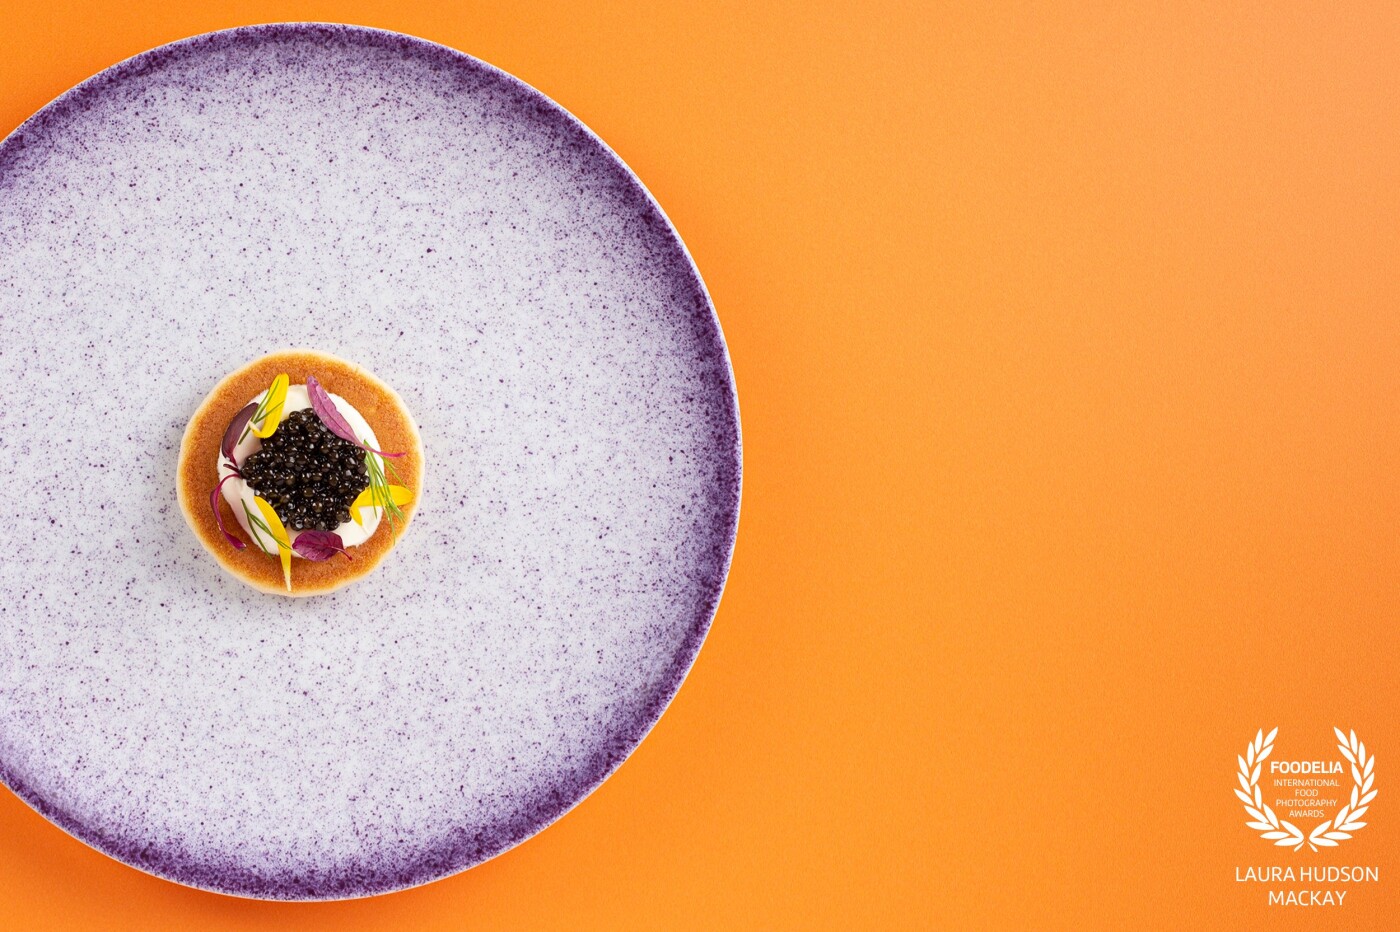 Choosing colours from the Sturia Caviar branding, creates a bold aesthetic for this delicate canapé. Collaboration with Scottish chef, Fraser Cameron. Sturia caviar blini, creme fraiche and petals.